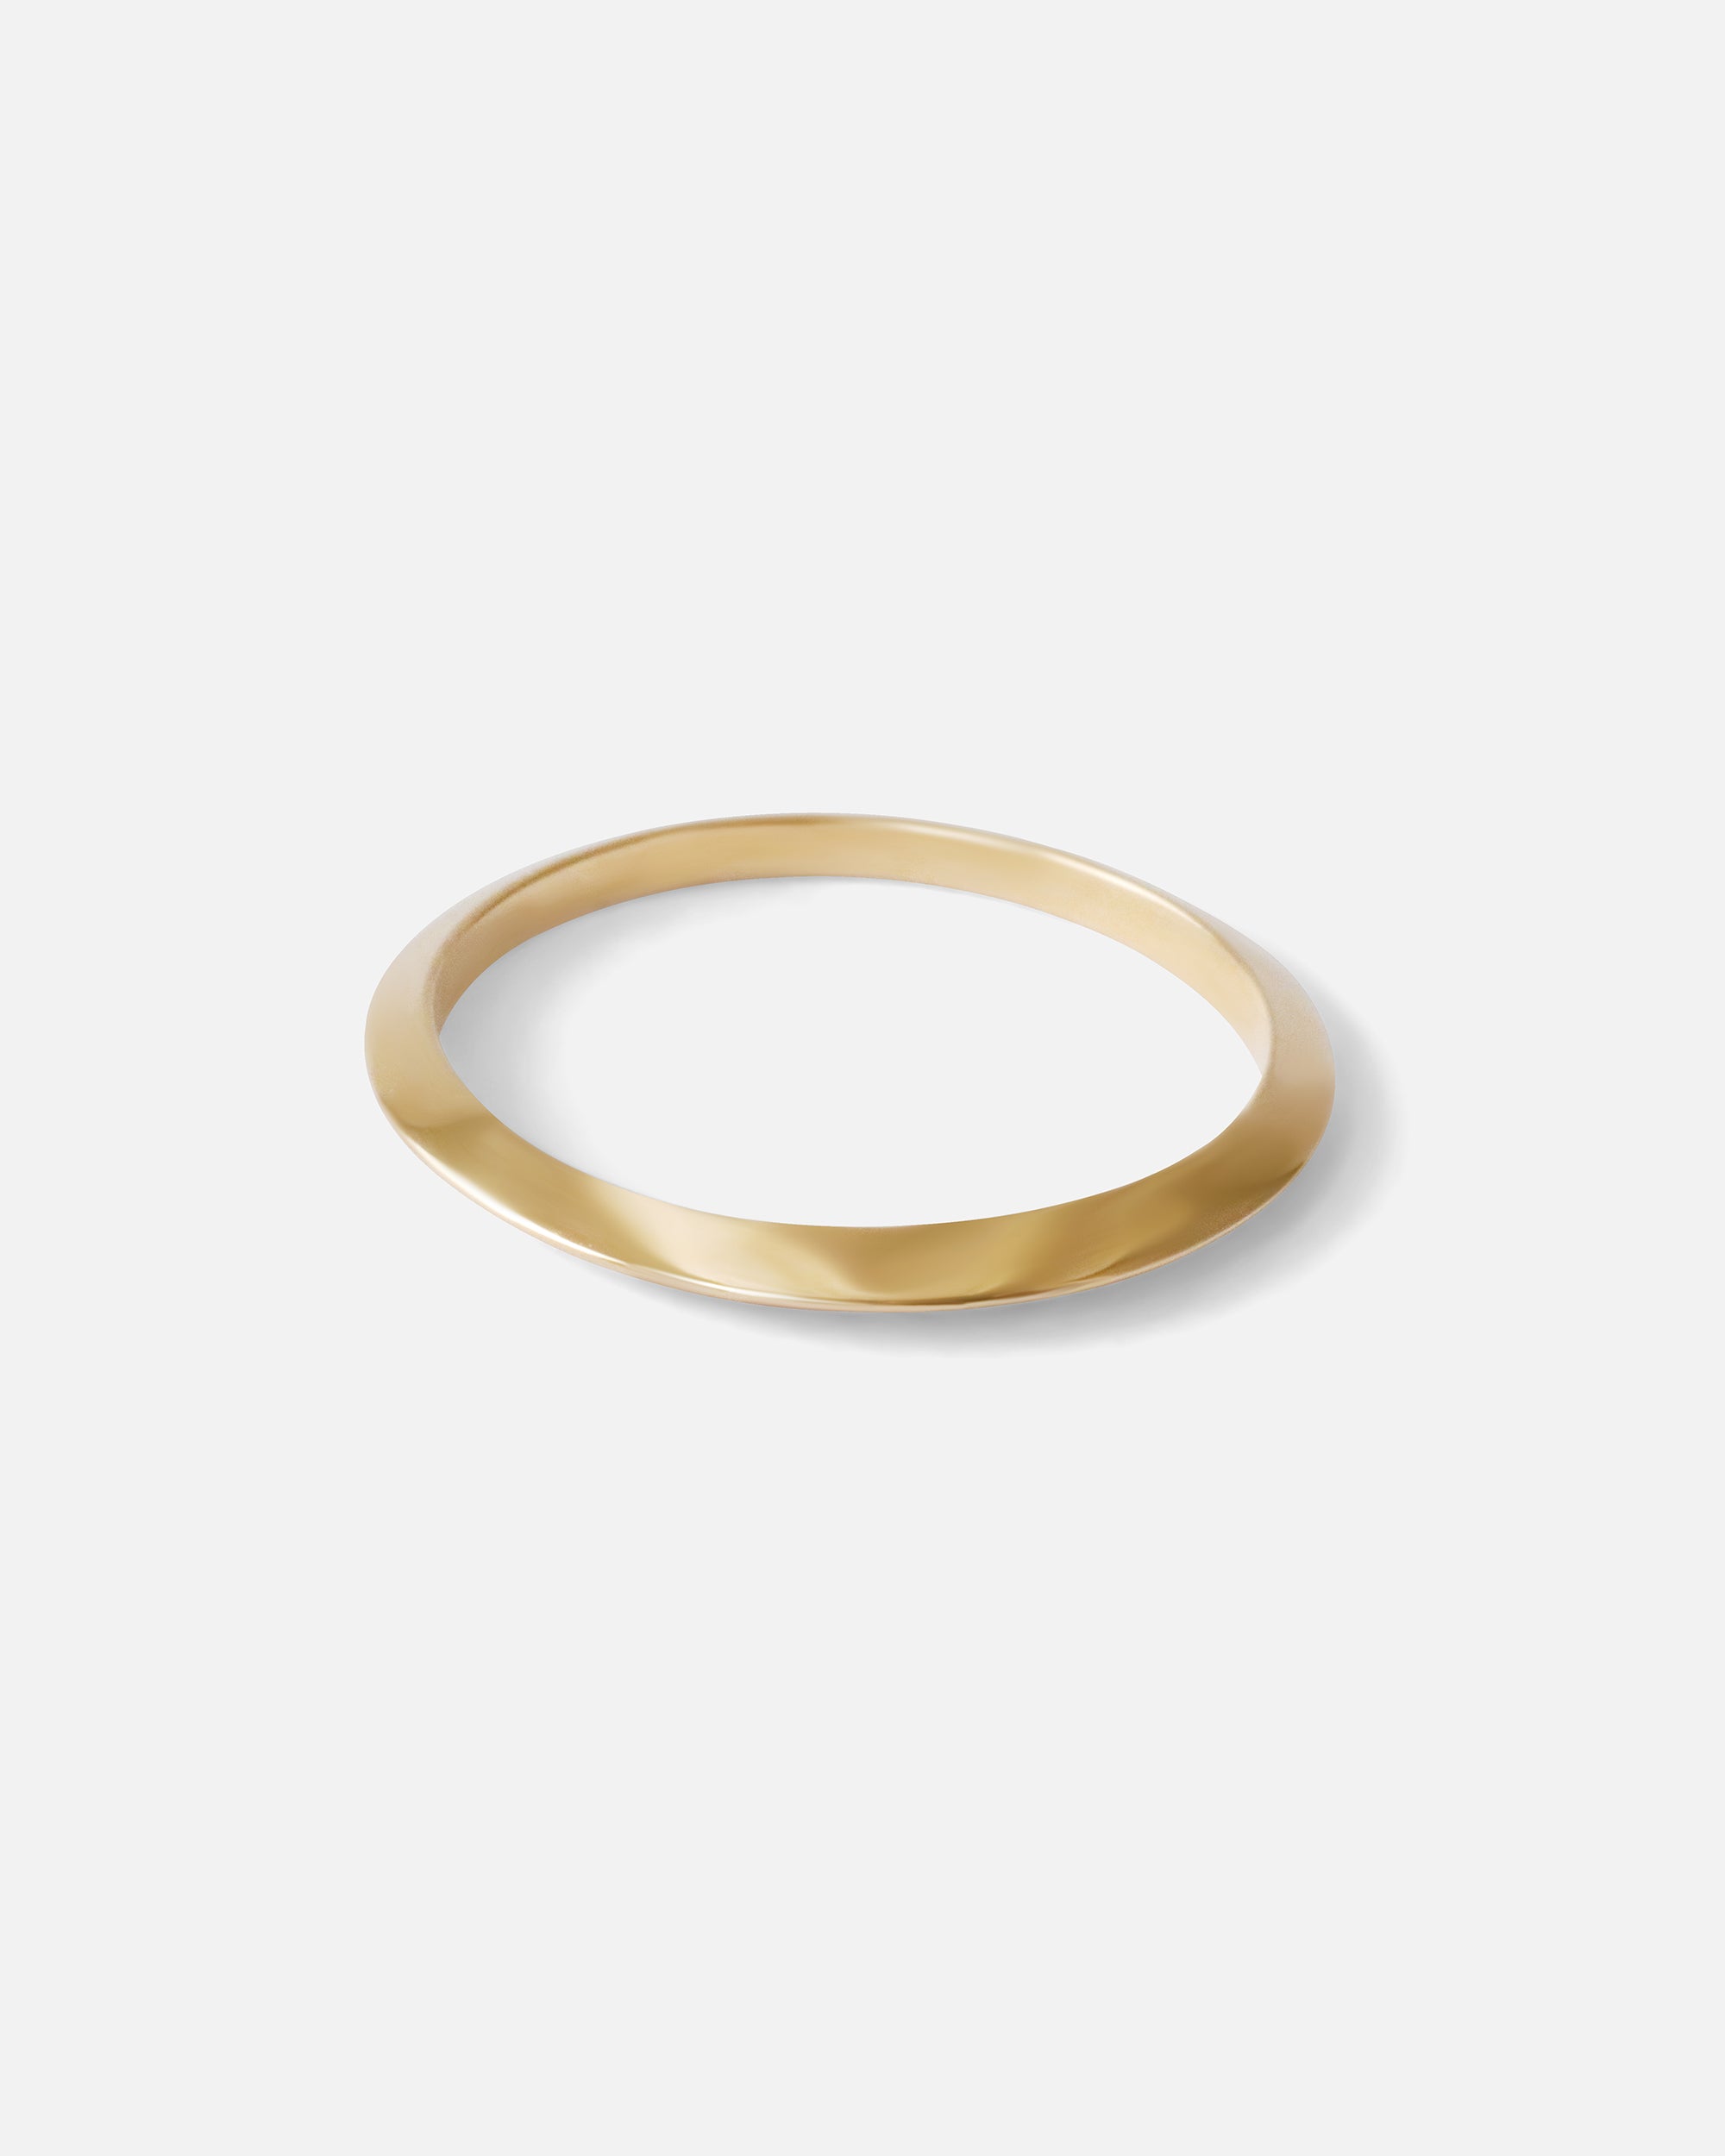 Floe Band / Classic By Casual Seance in Wedding Bands Category